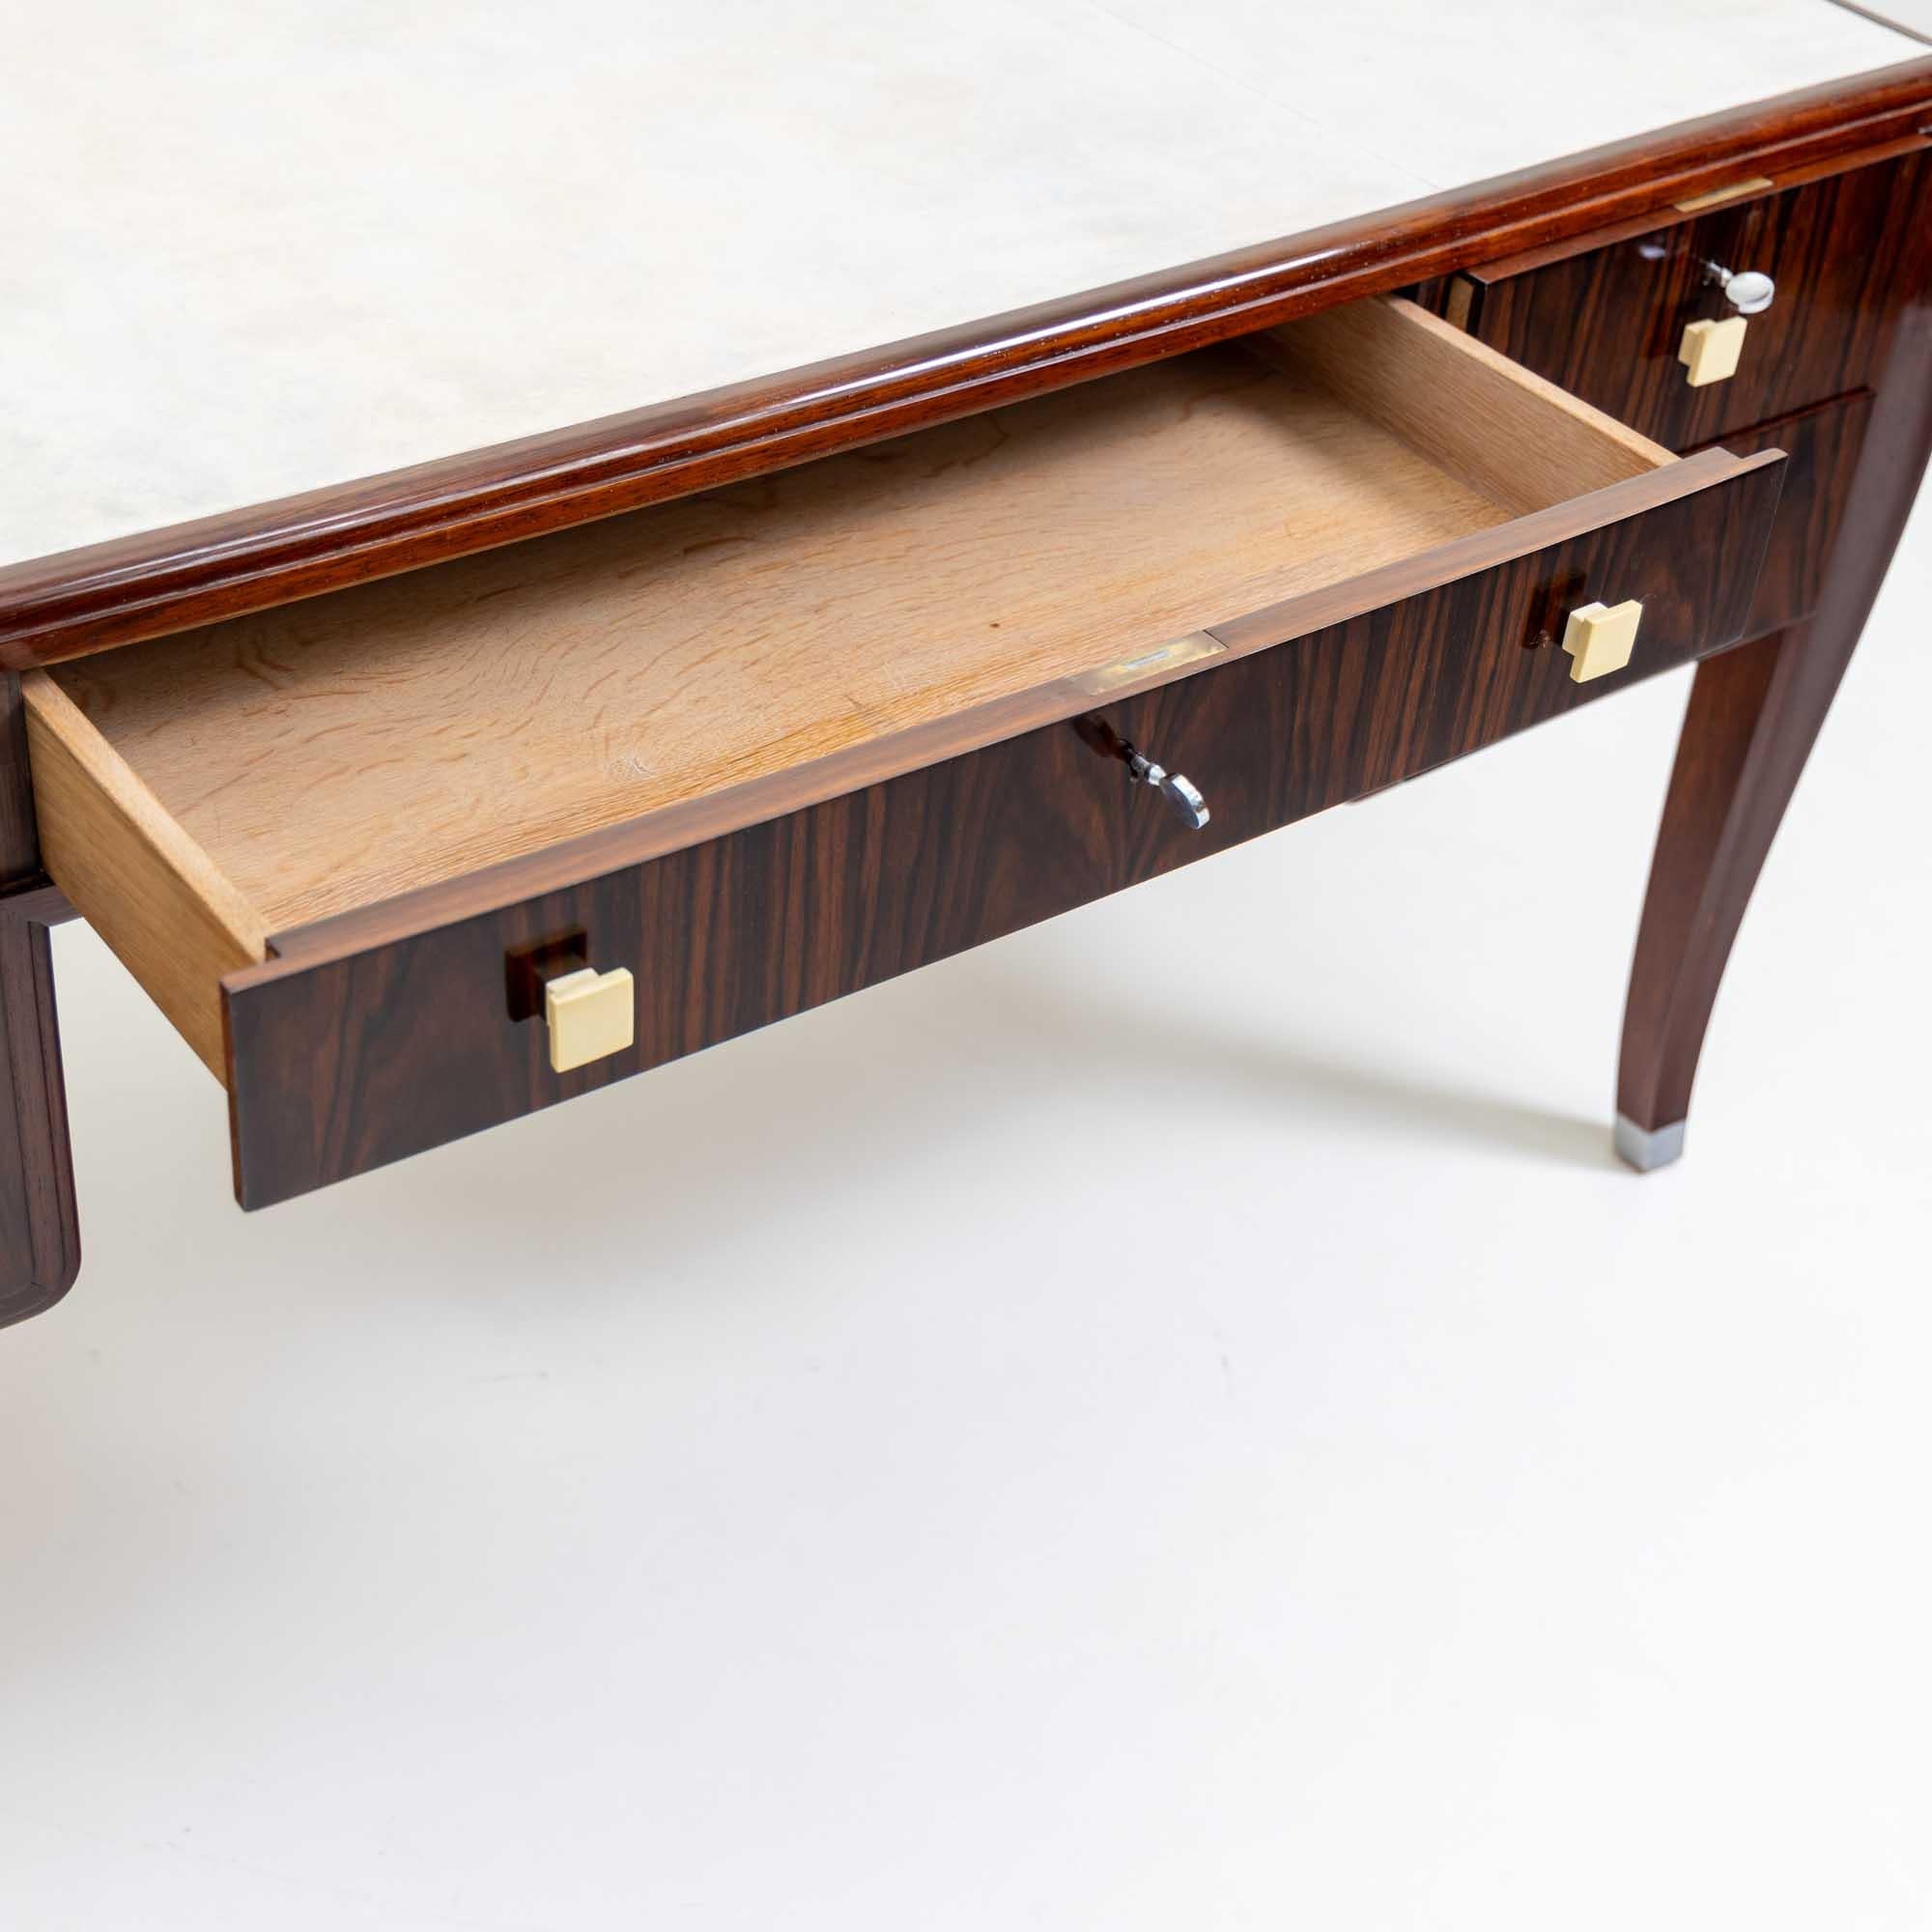 Palisander Art Deco Desk in the style of Jacques-Emile Ruhlmann (1879-1933), France, 1920s For Sale